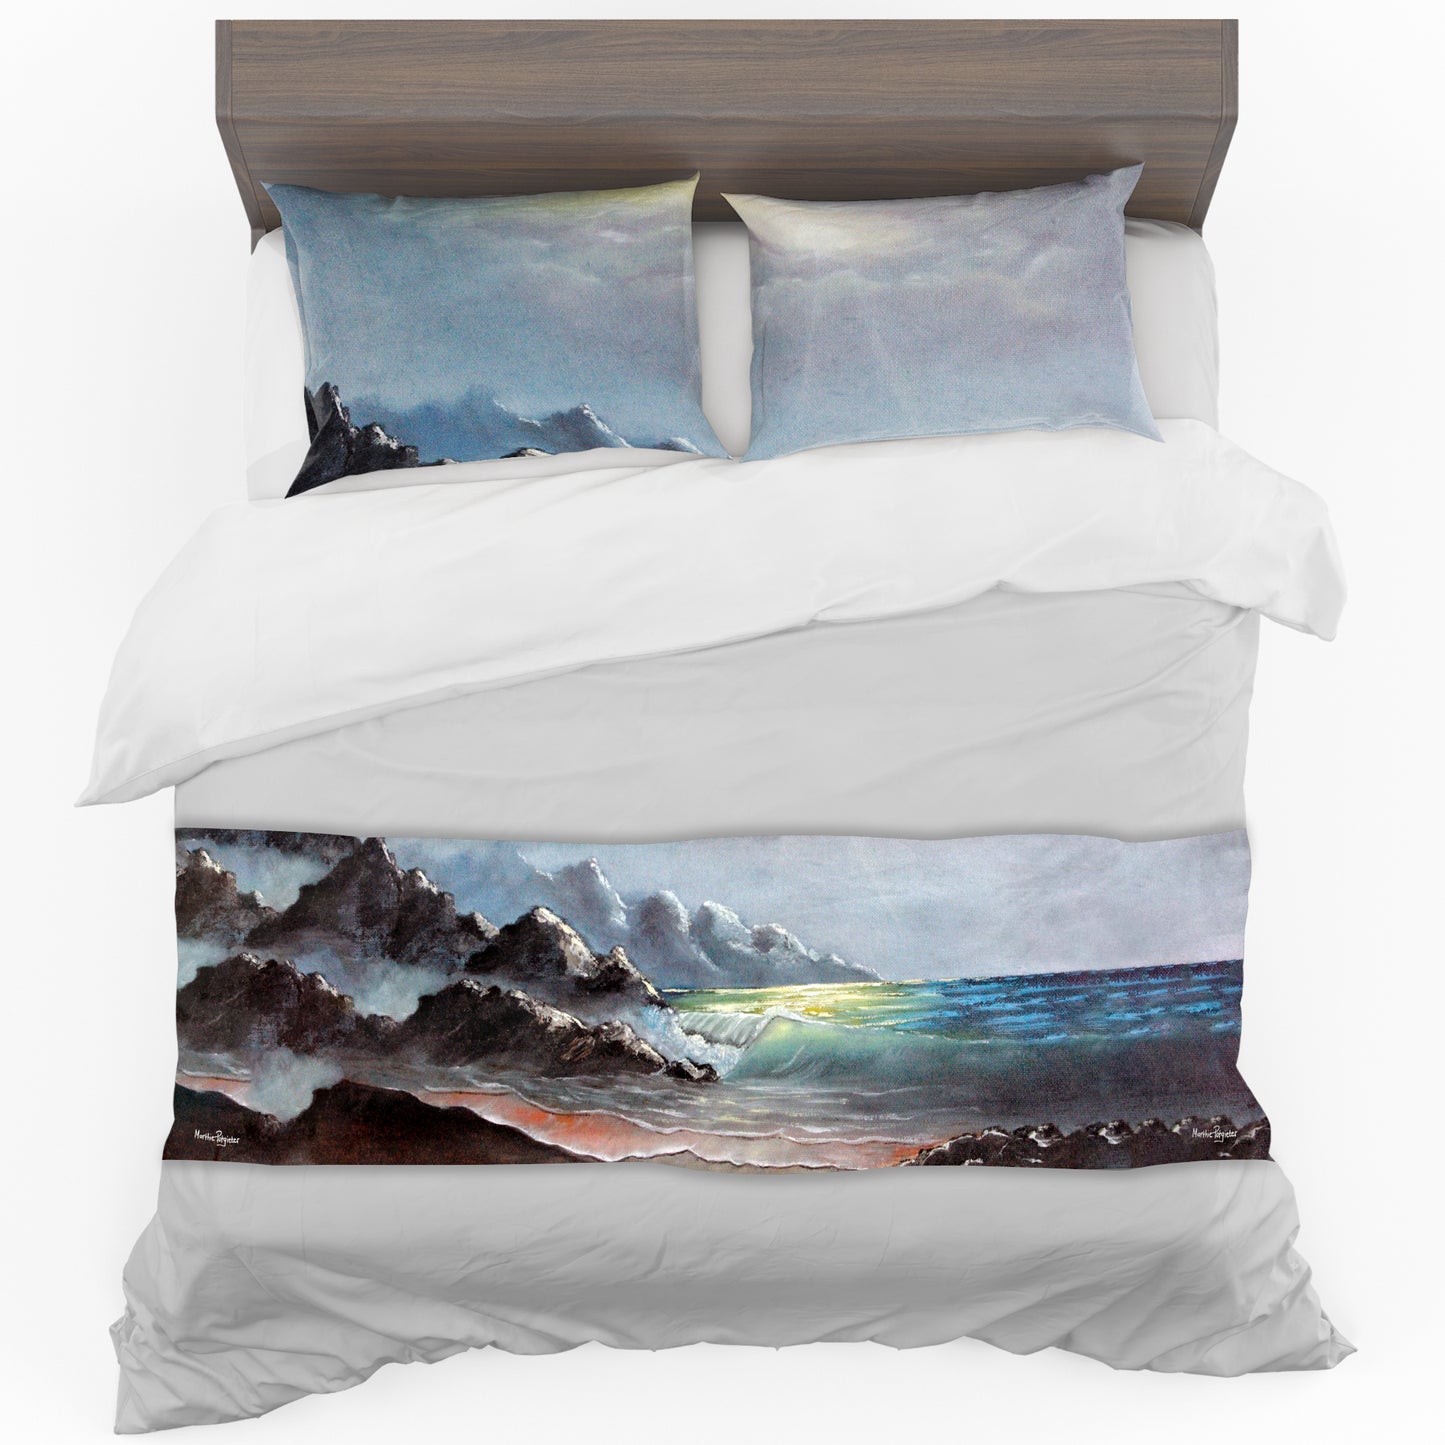 Windy Waves By Marthie Potgieter Bed Runner and Optional Pillowcases